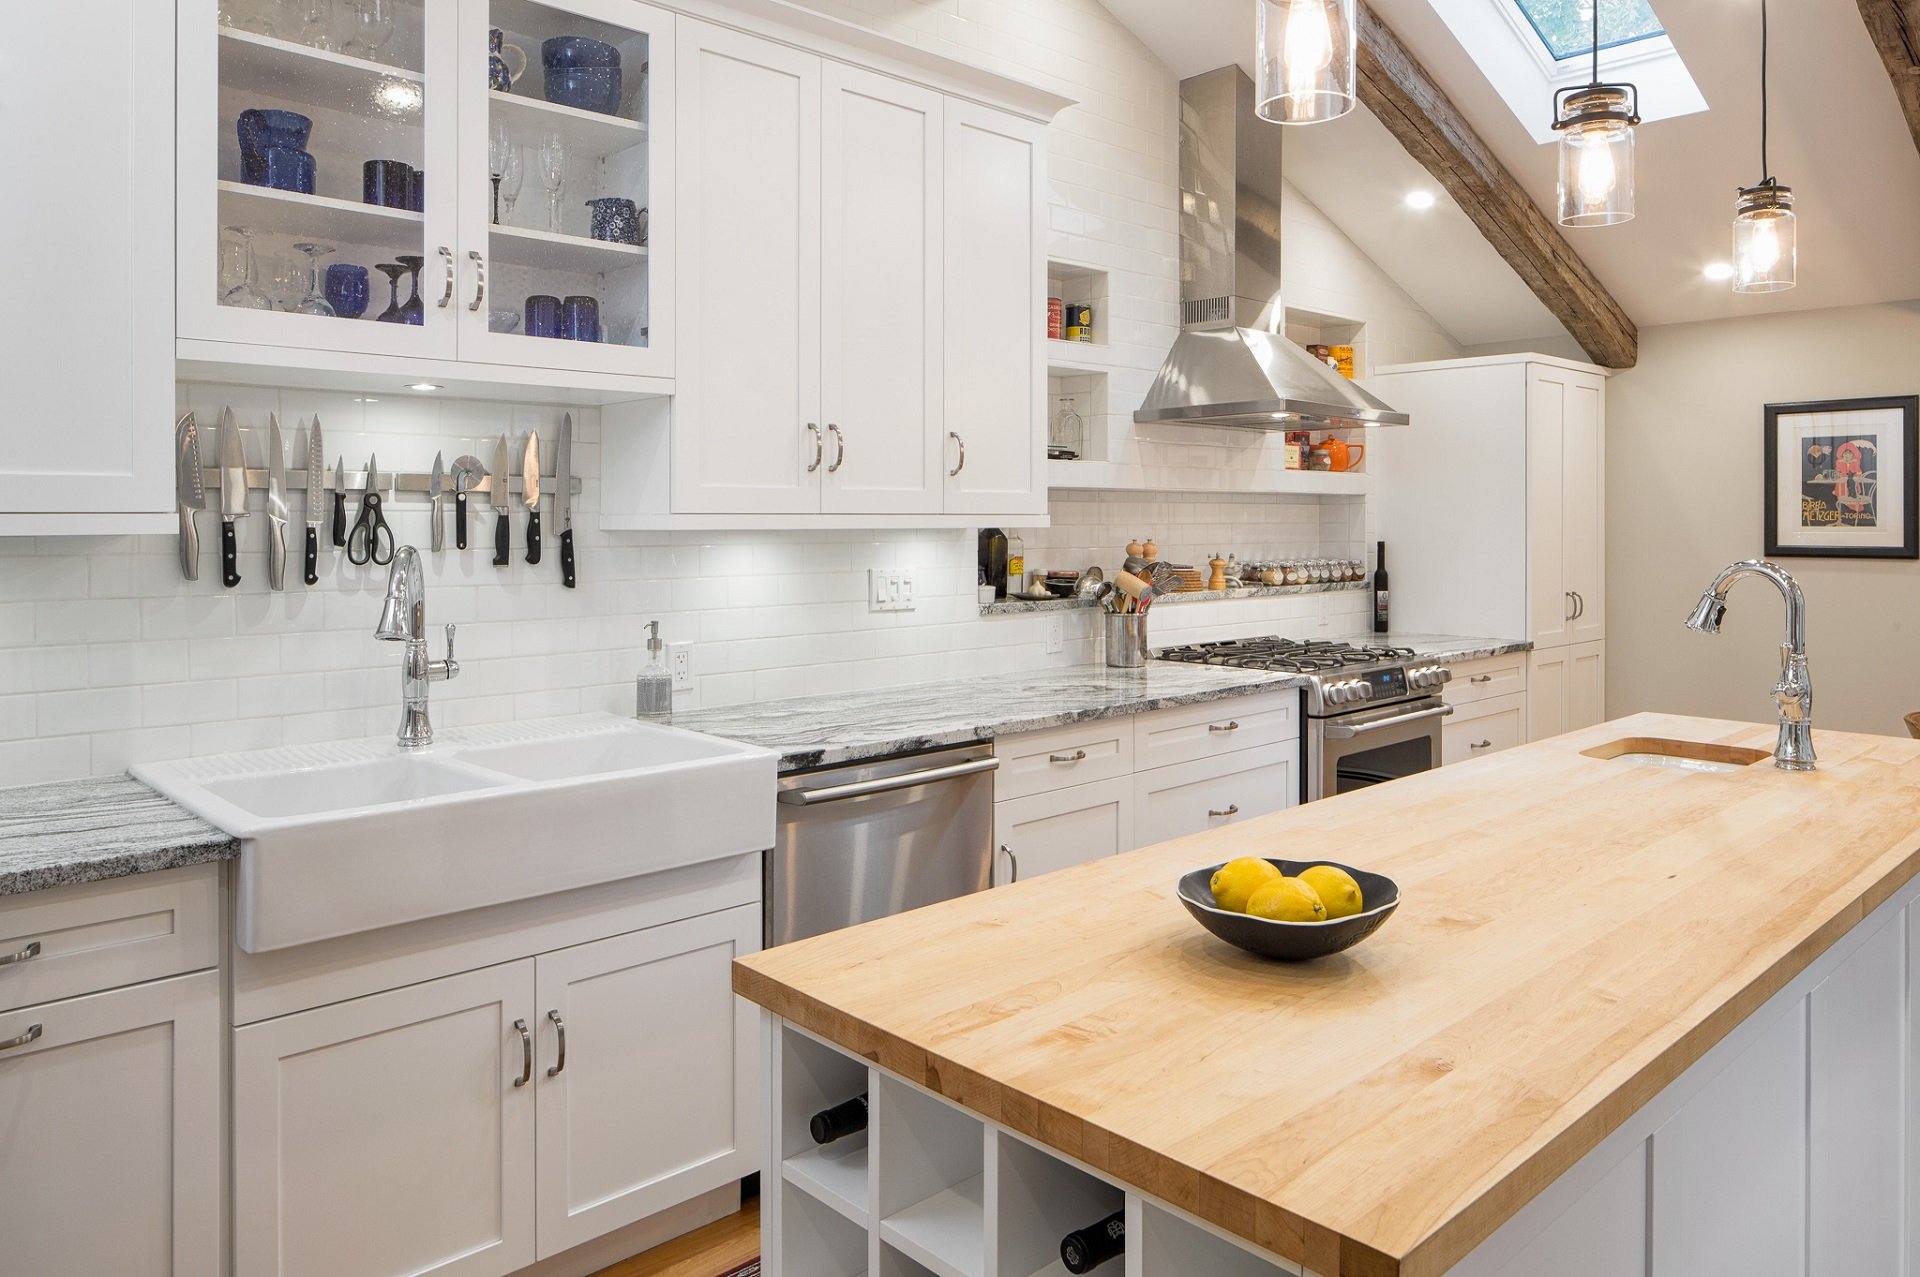 Deslaurier's Rustic and White kitchen design.